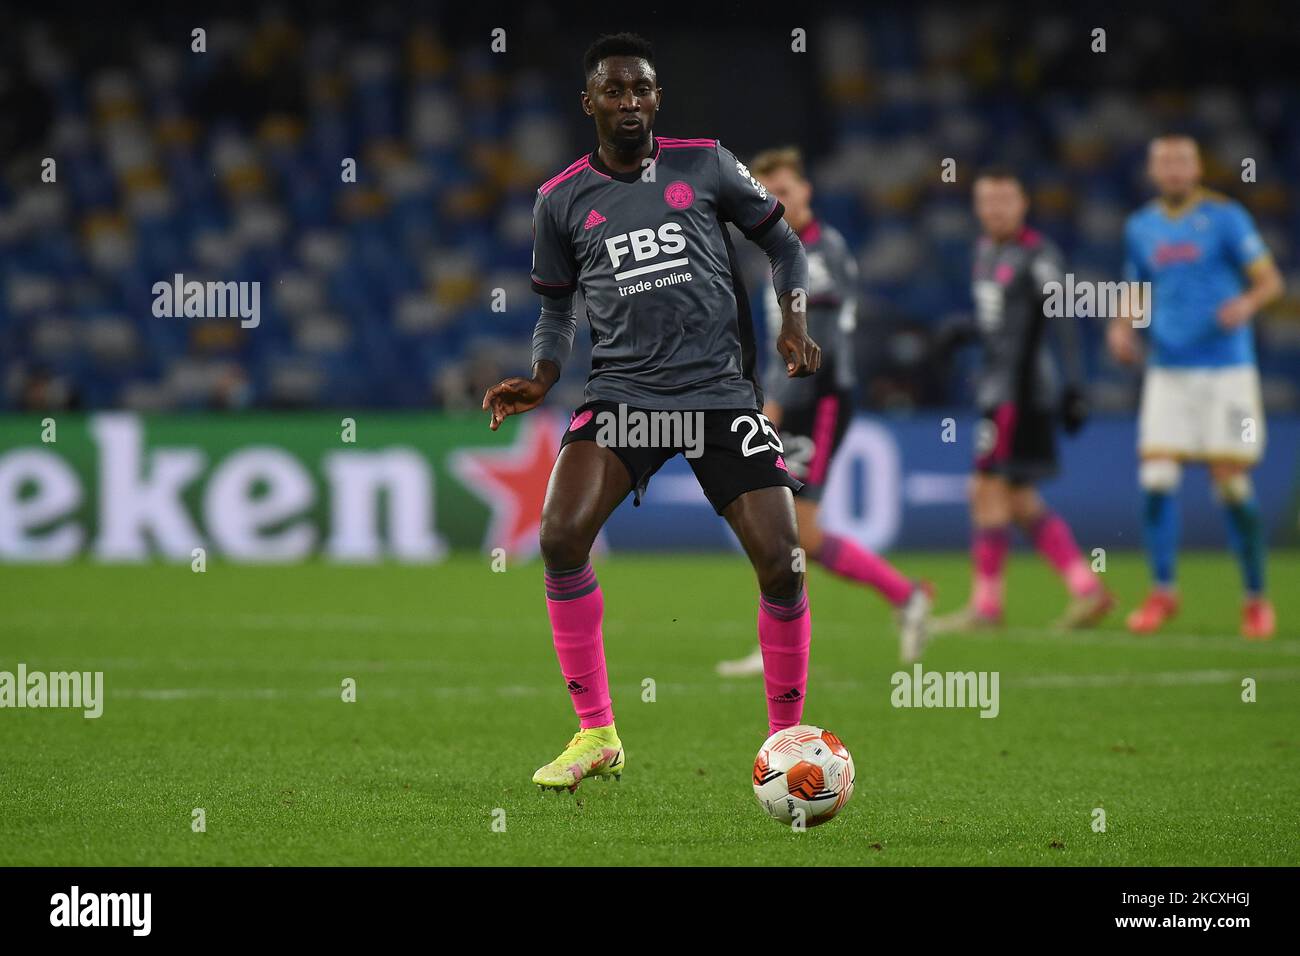 Wilfred Ndidi of Leicester City during the UEFA Europa League match between SSC Napoli and Leicester City at Stadio Diego Armando Maradona Naples Italy on 9 December 2021. (Photo by Franco Romano/NurPhoto) Stock Photo